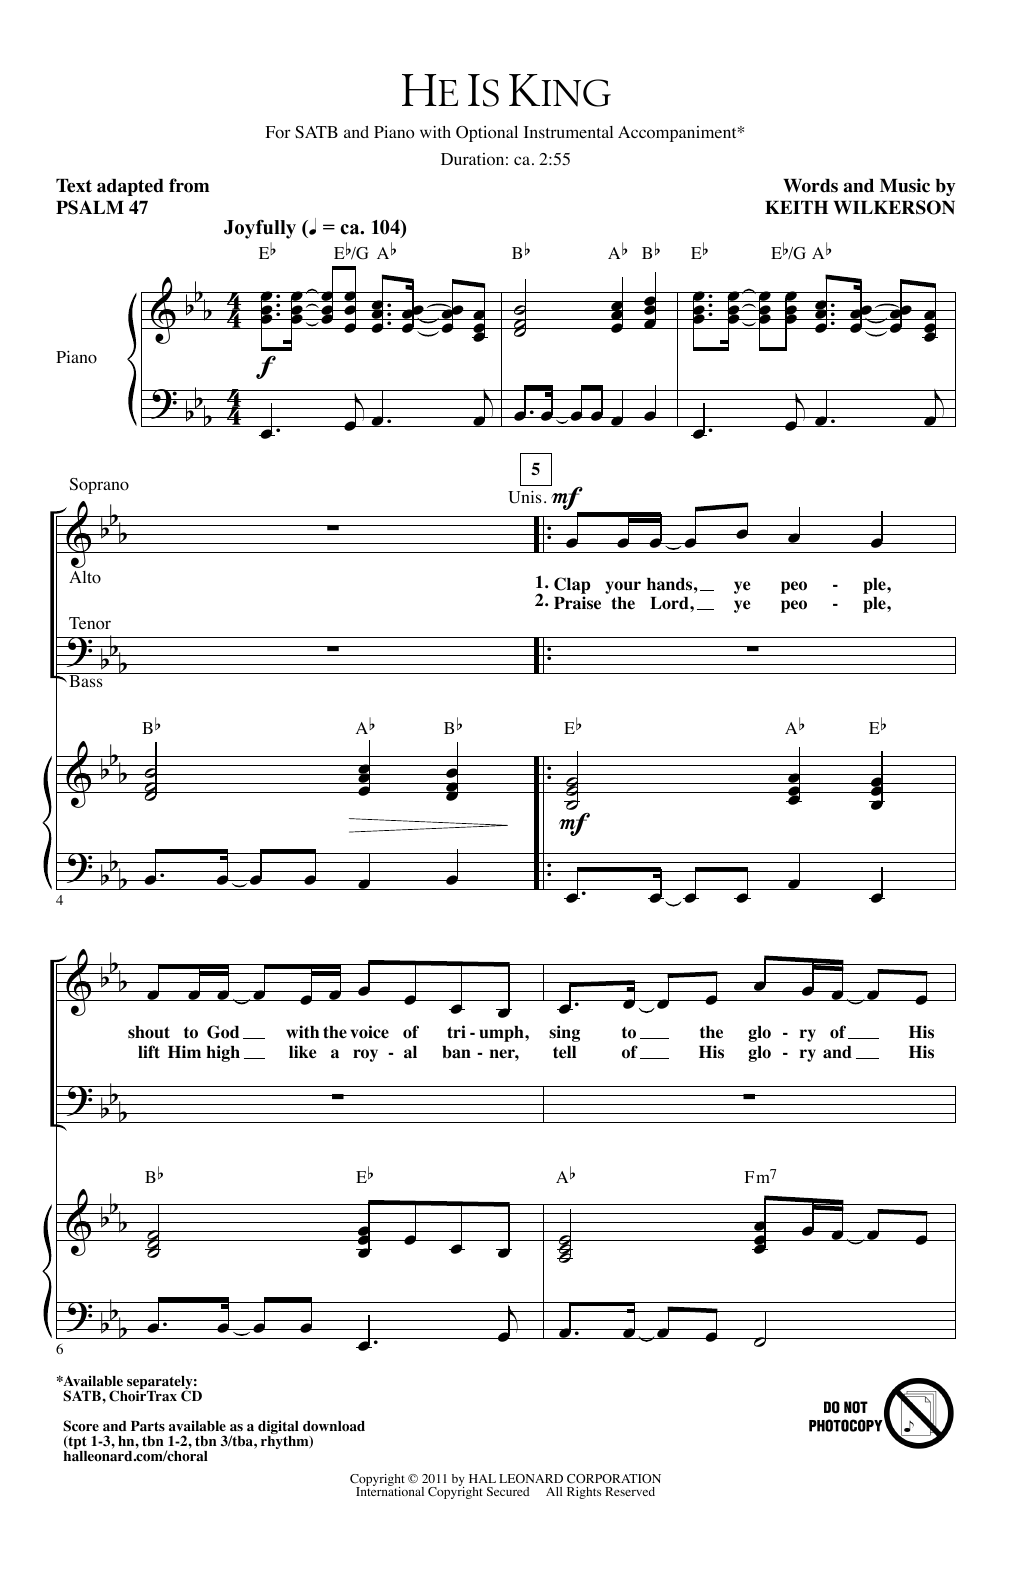 Download Keith Wilkerson He Is King Sheet Music